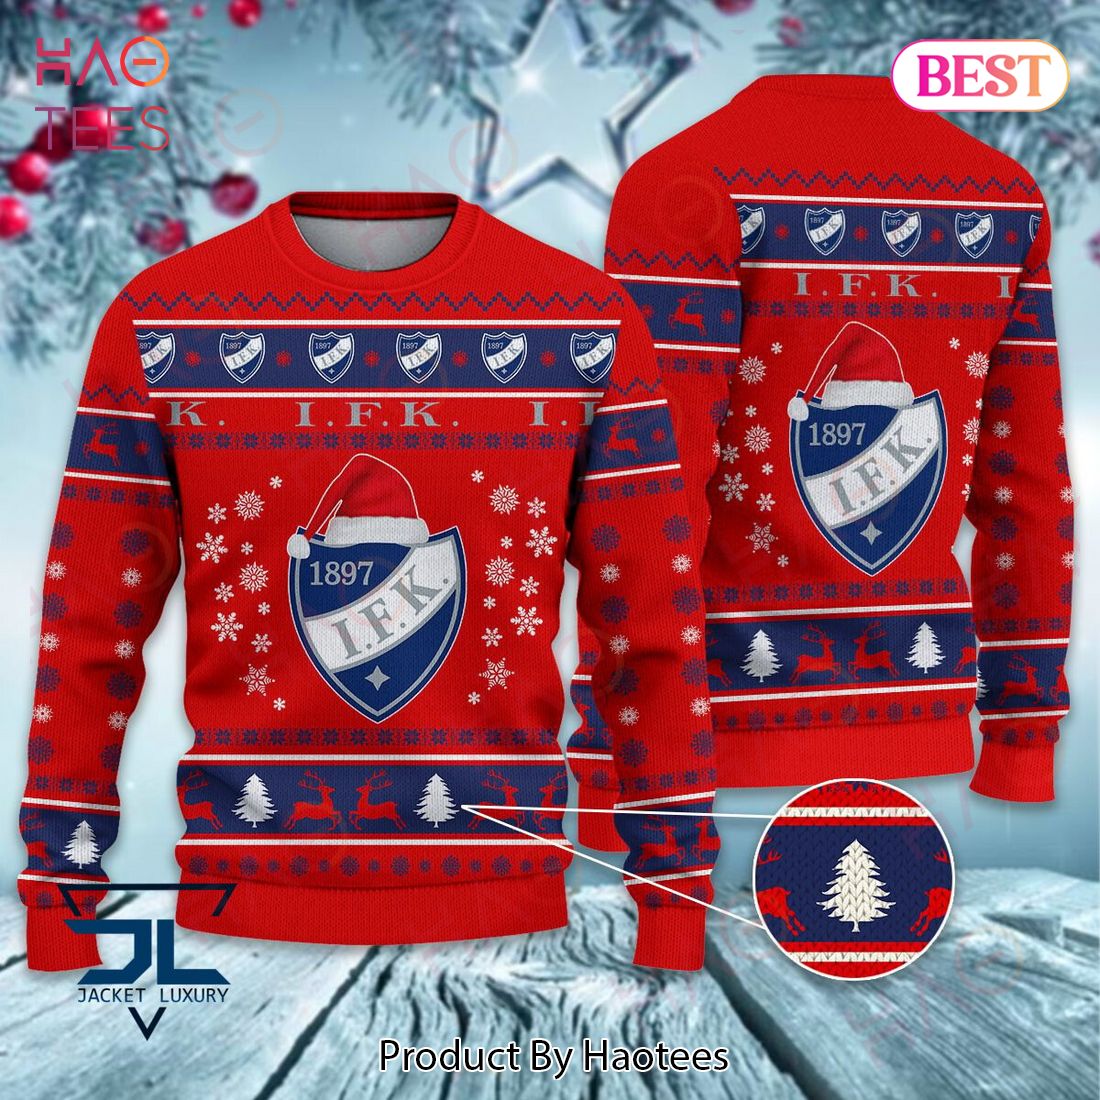 HOT HIFK 1897 Luxury Brand Sweater Limited Edition